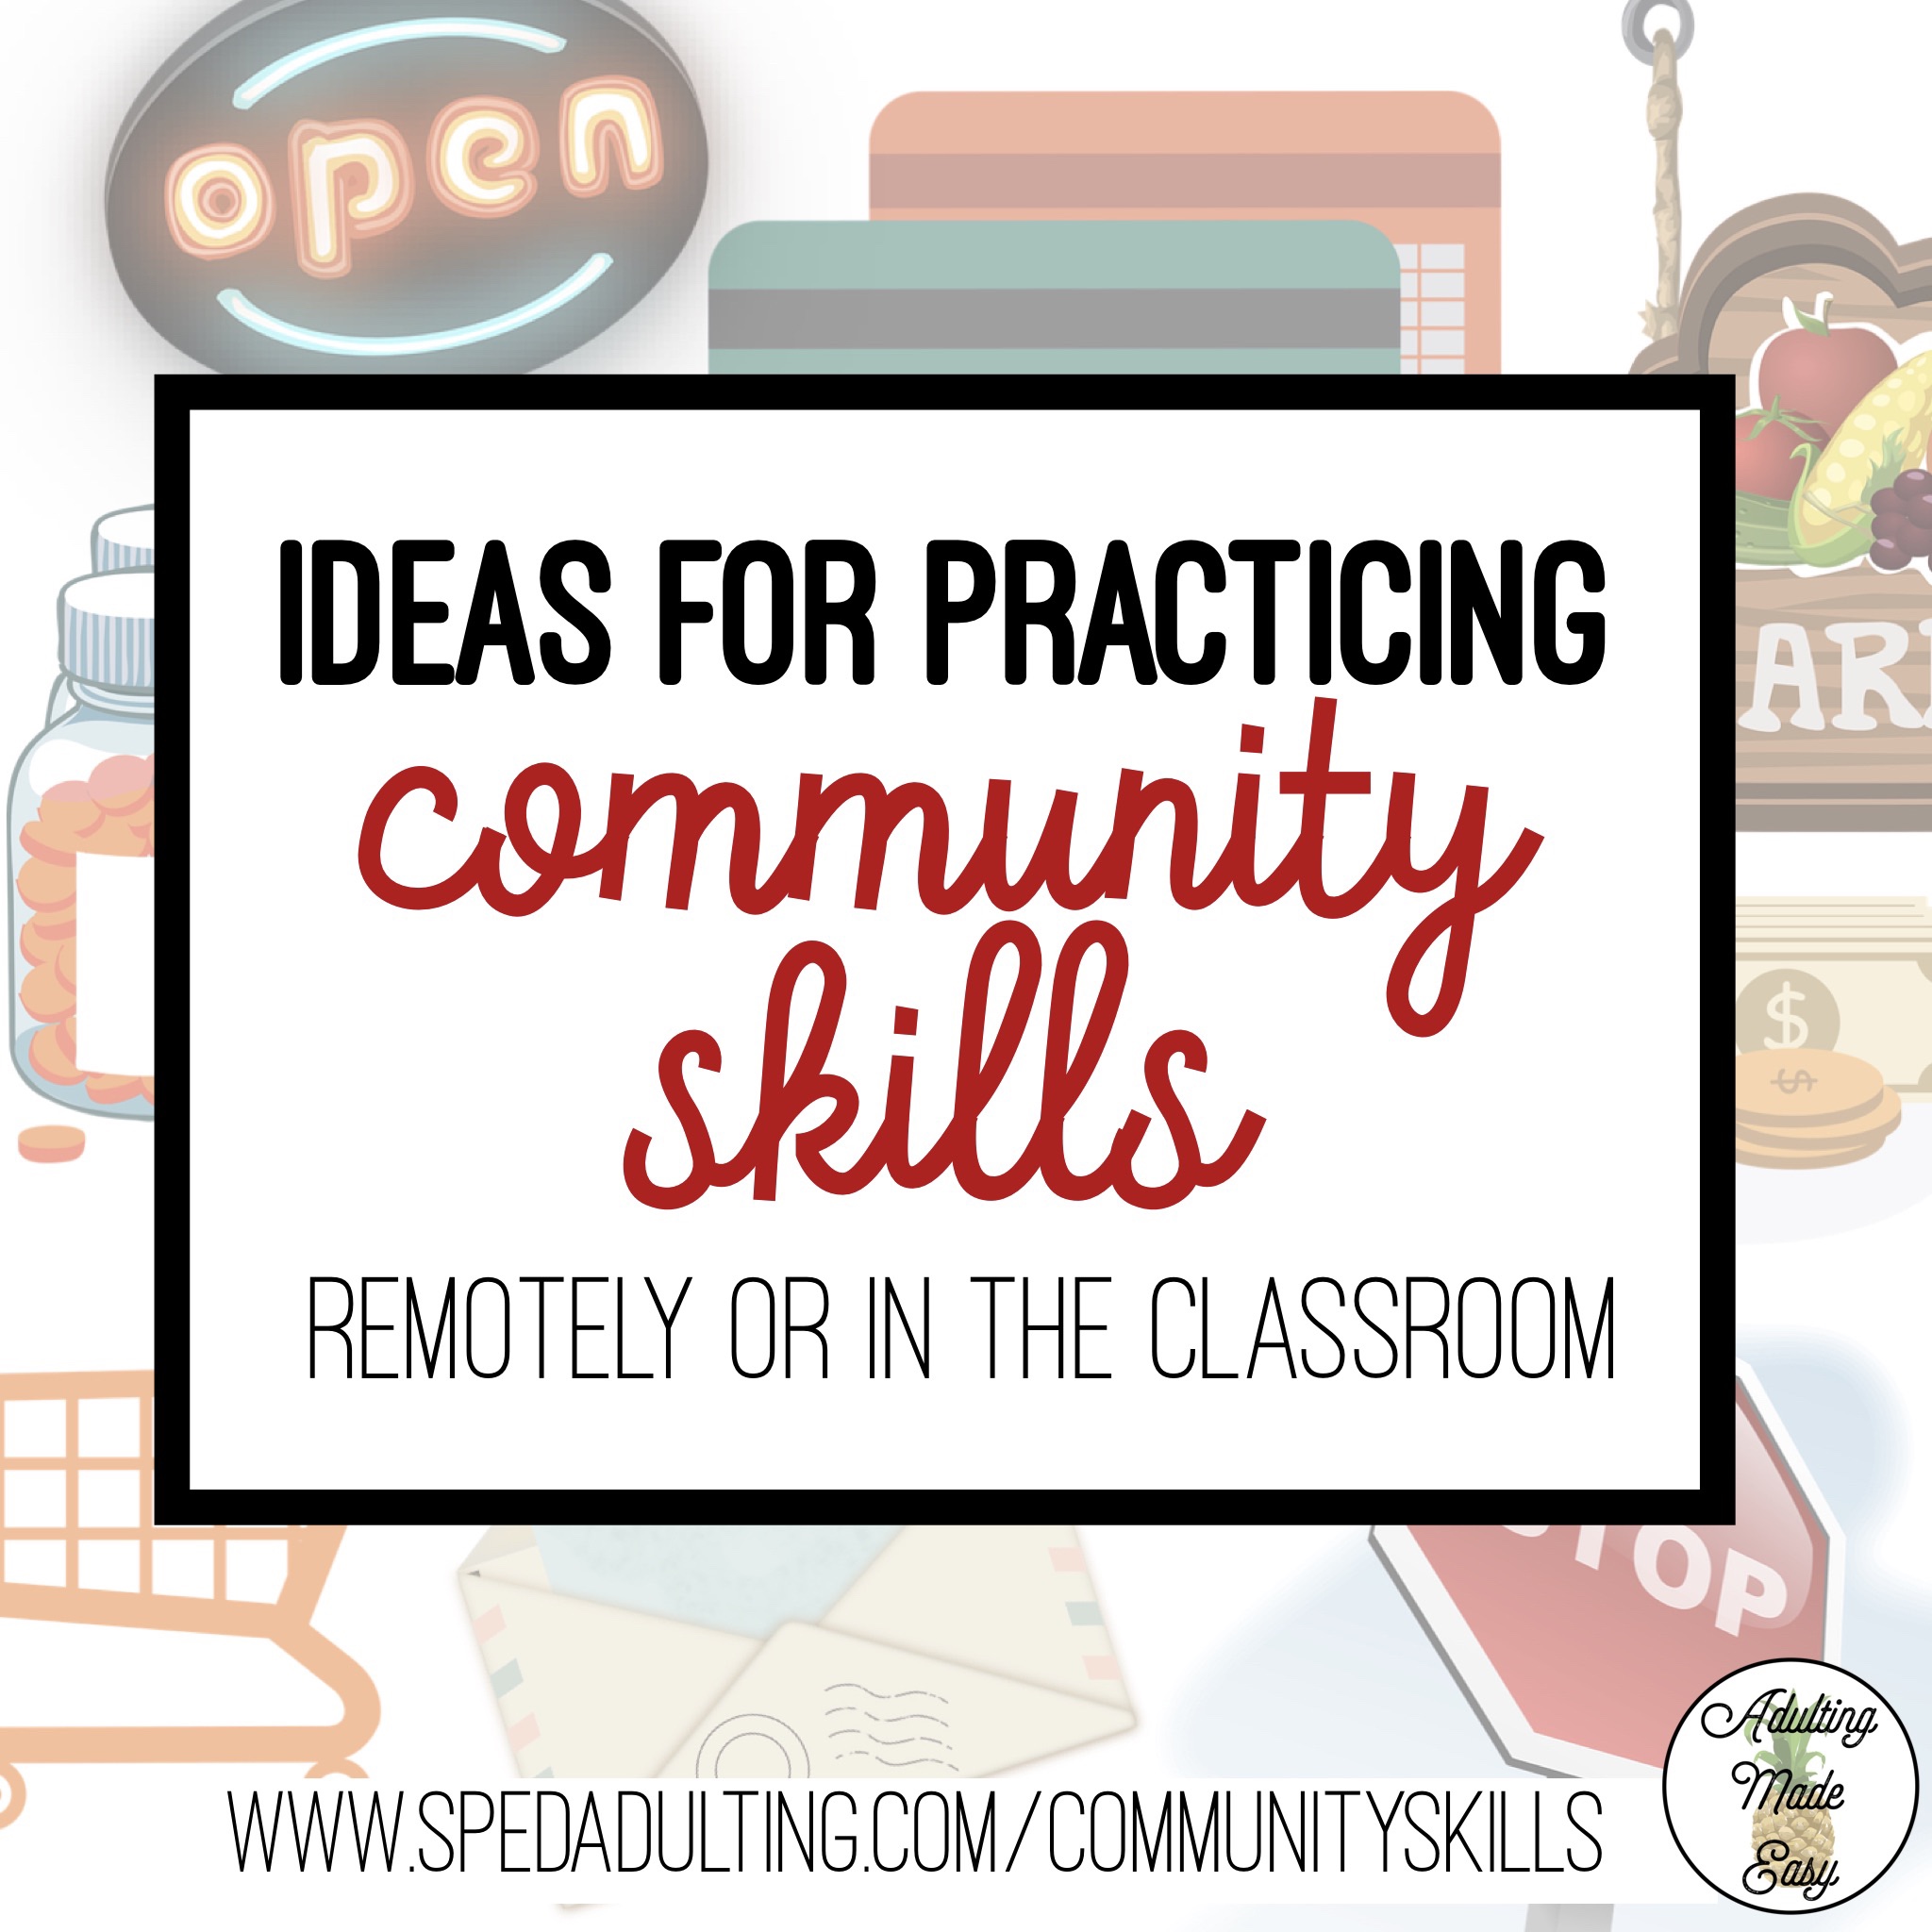 BLOG: Ideas for practicing community skills remotely or in the classroom